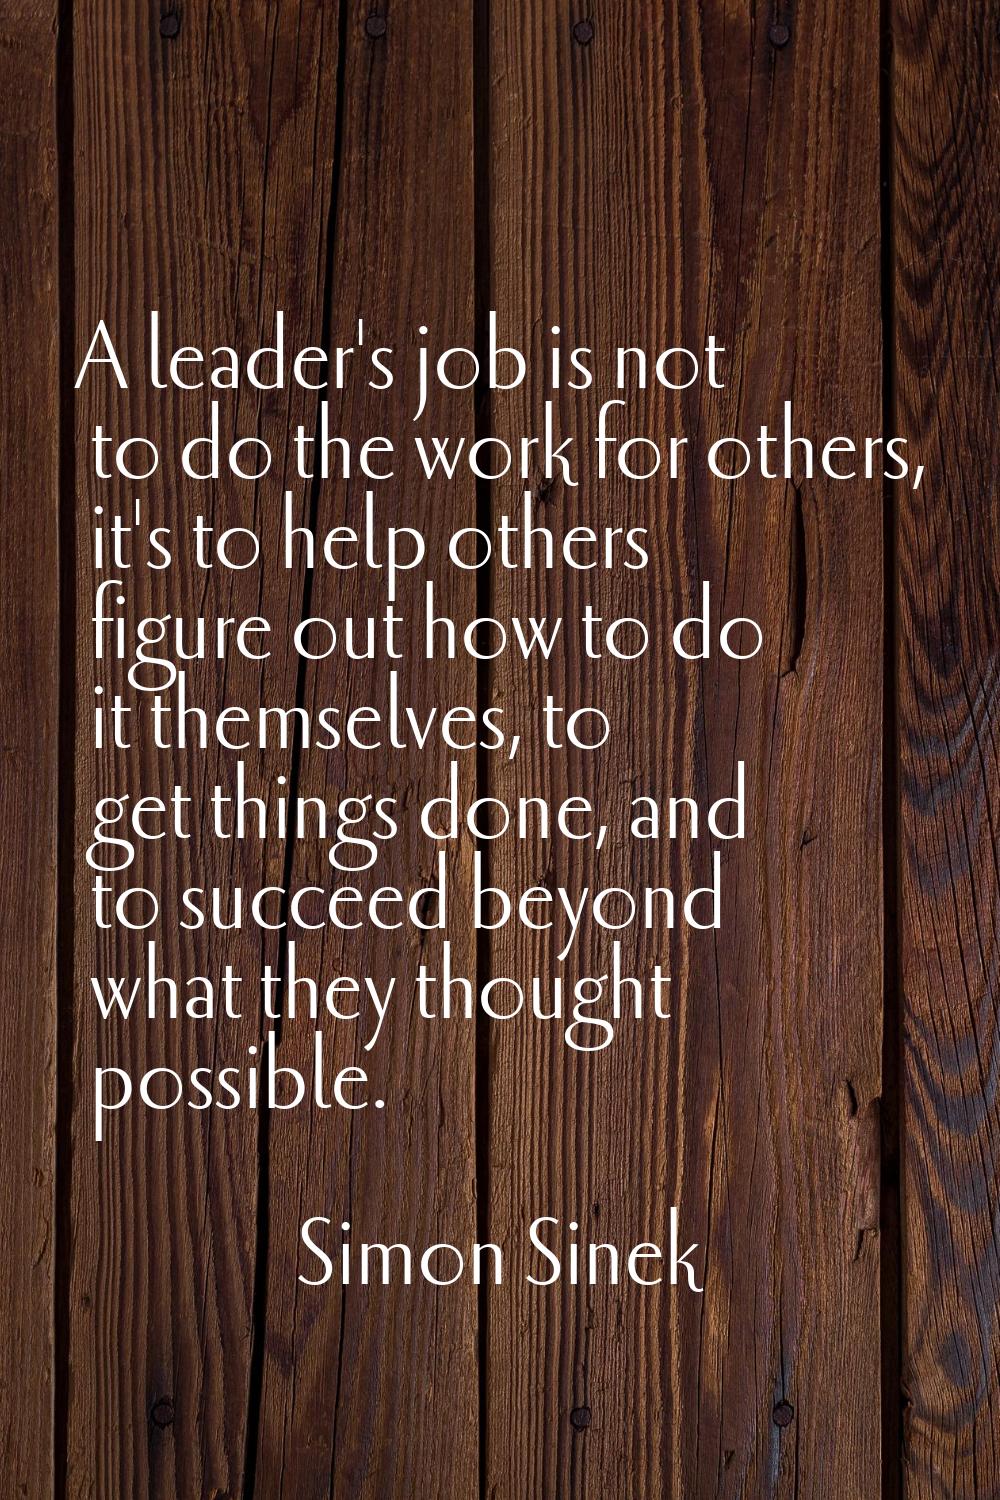 A leader's job is not to do the work for others, it's to help others figure out how to do it themse